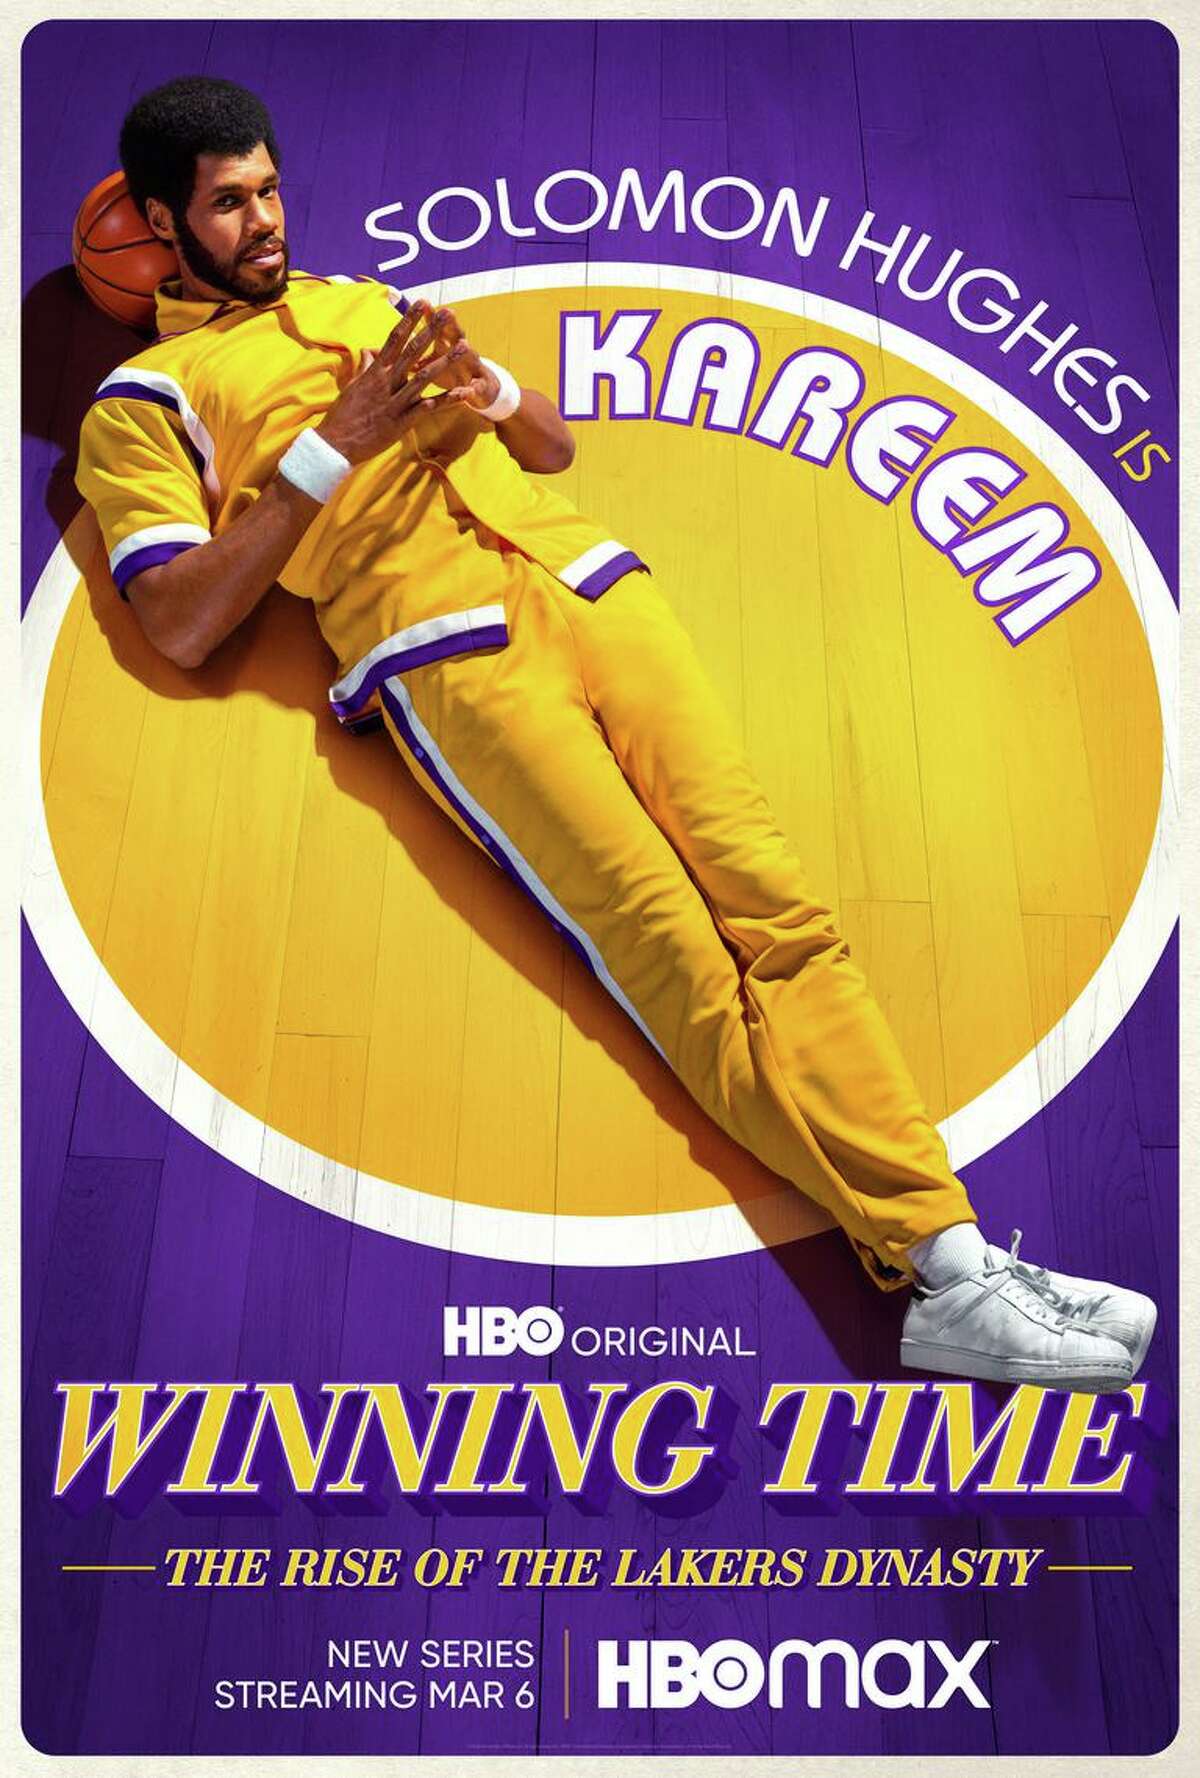 This is a promotional photo of Solomon Hughes portraying Kareem Abdul-Jabbar for the HBO miniseries "Winning Time: The Rise of the Lakers Dynasty."